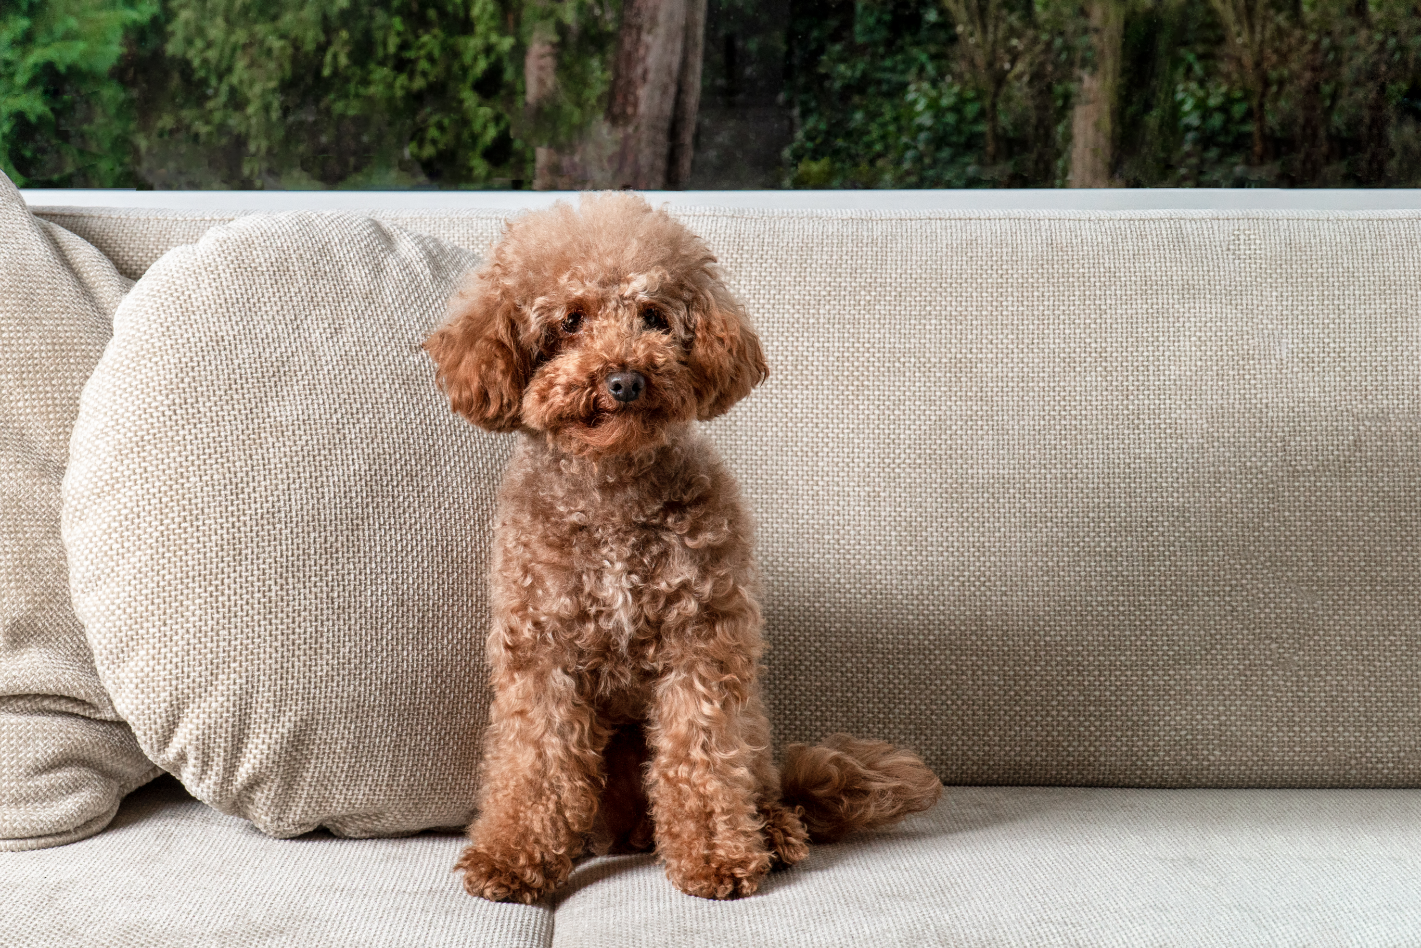 1-Hero image-Poodle minature GettyImages-1362755017